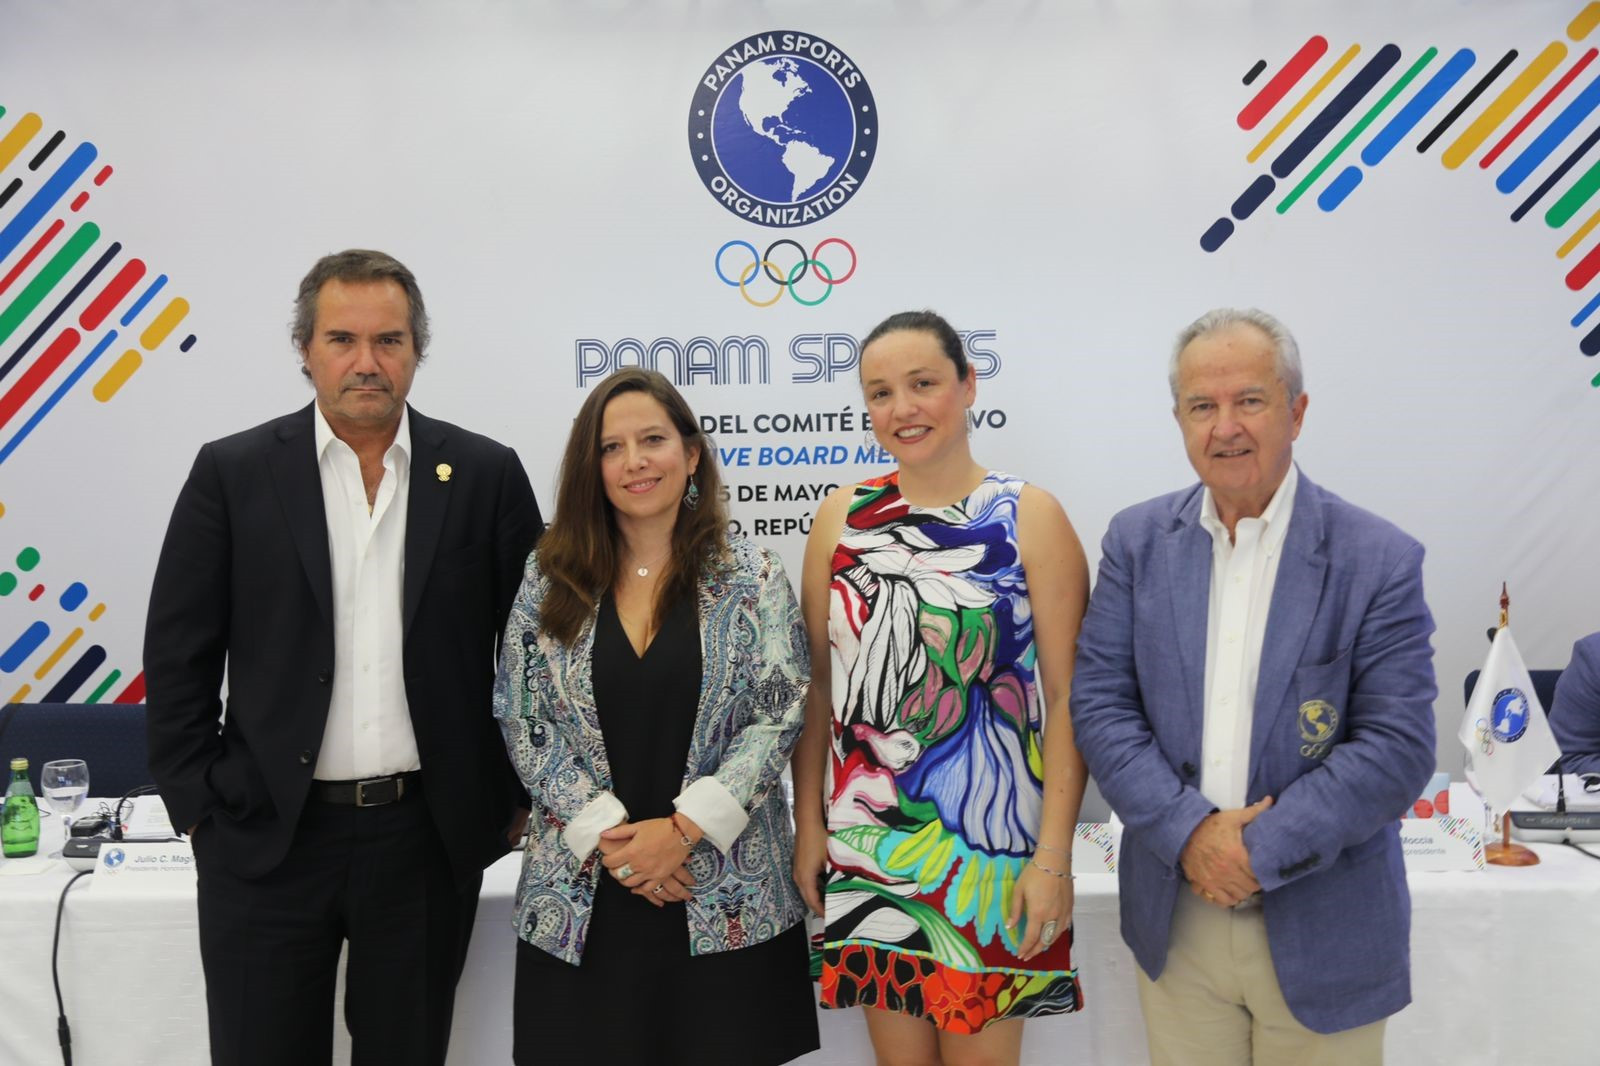 Panam Sport President Neven Ilic, Chilean Sports Minister Alexandra Benado, Santiago 2023 chief executive Gianna Cunazza and Chilean Olympic Committee President Miguel Ángel Mujica, left to right, all attended the meeting in Santo Domingo ©Panam Sports